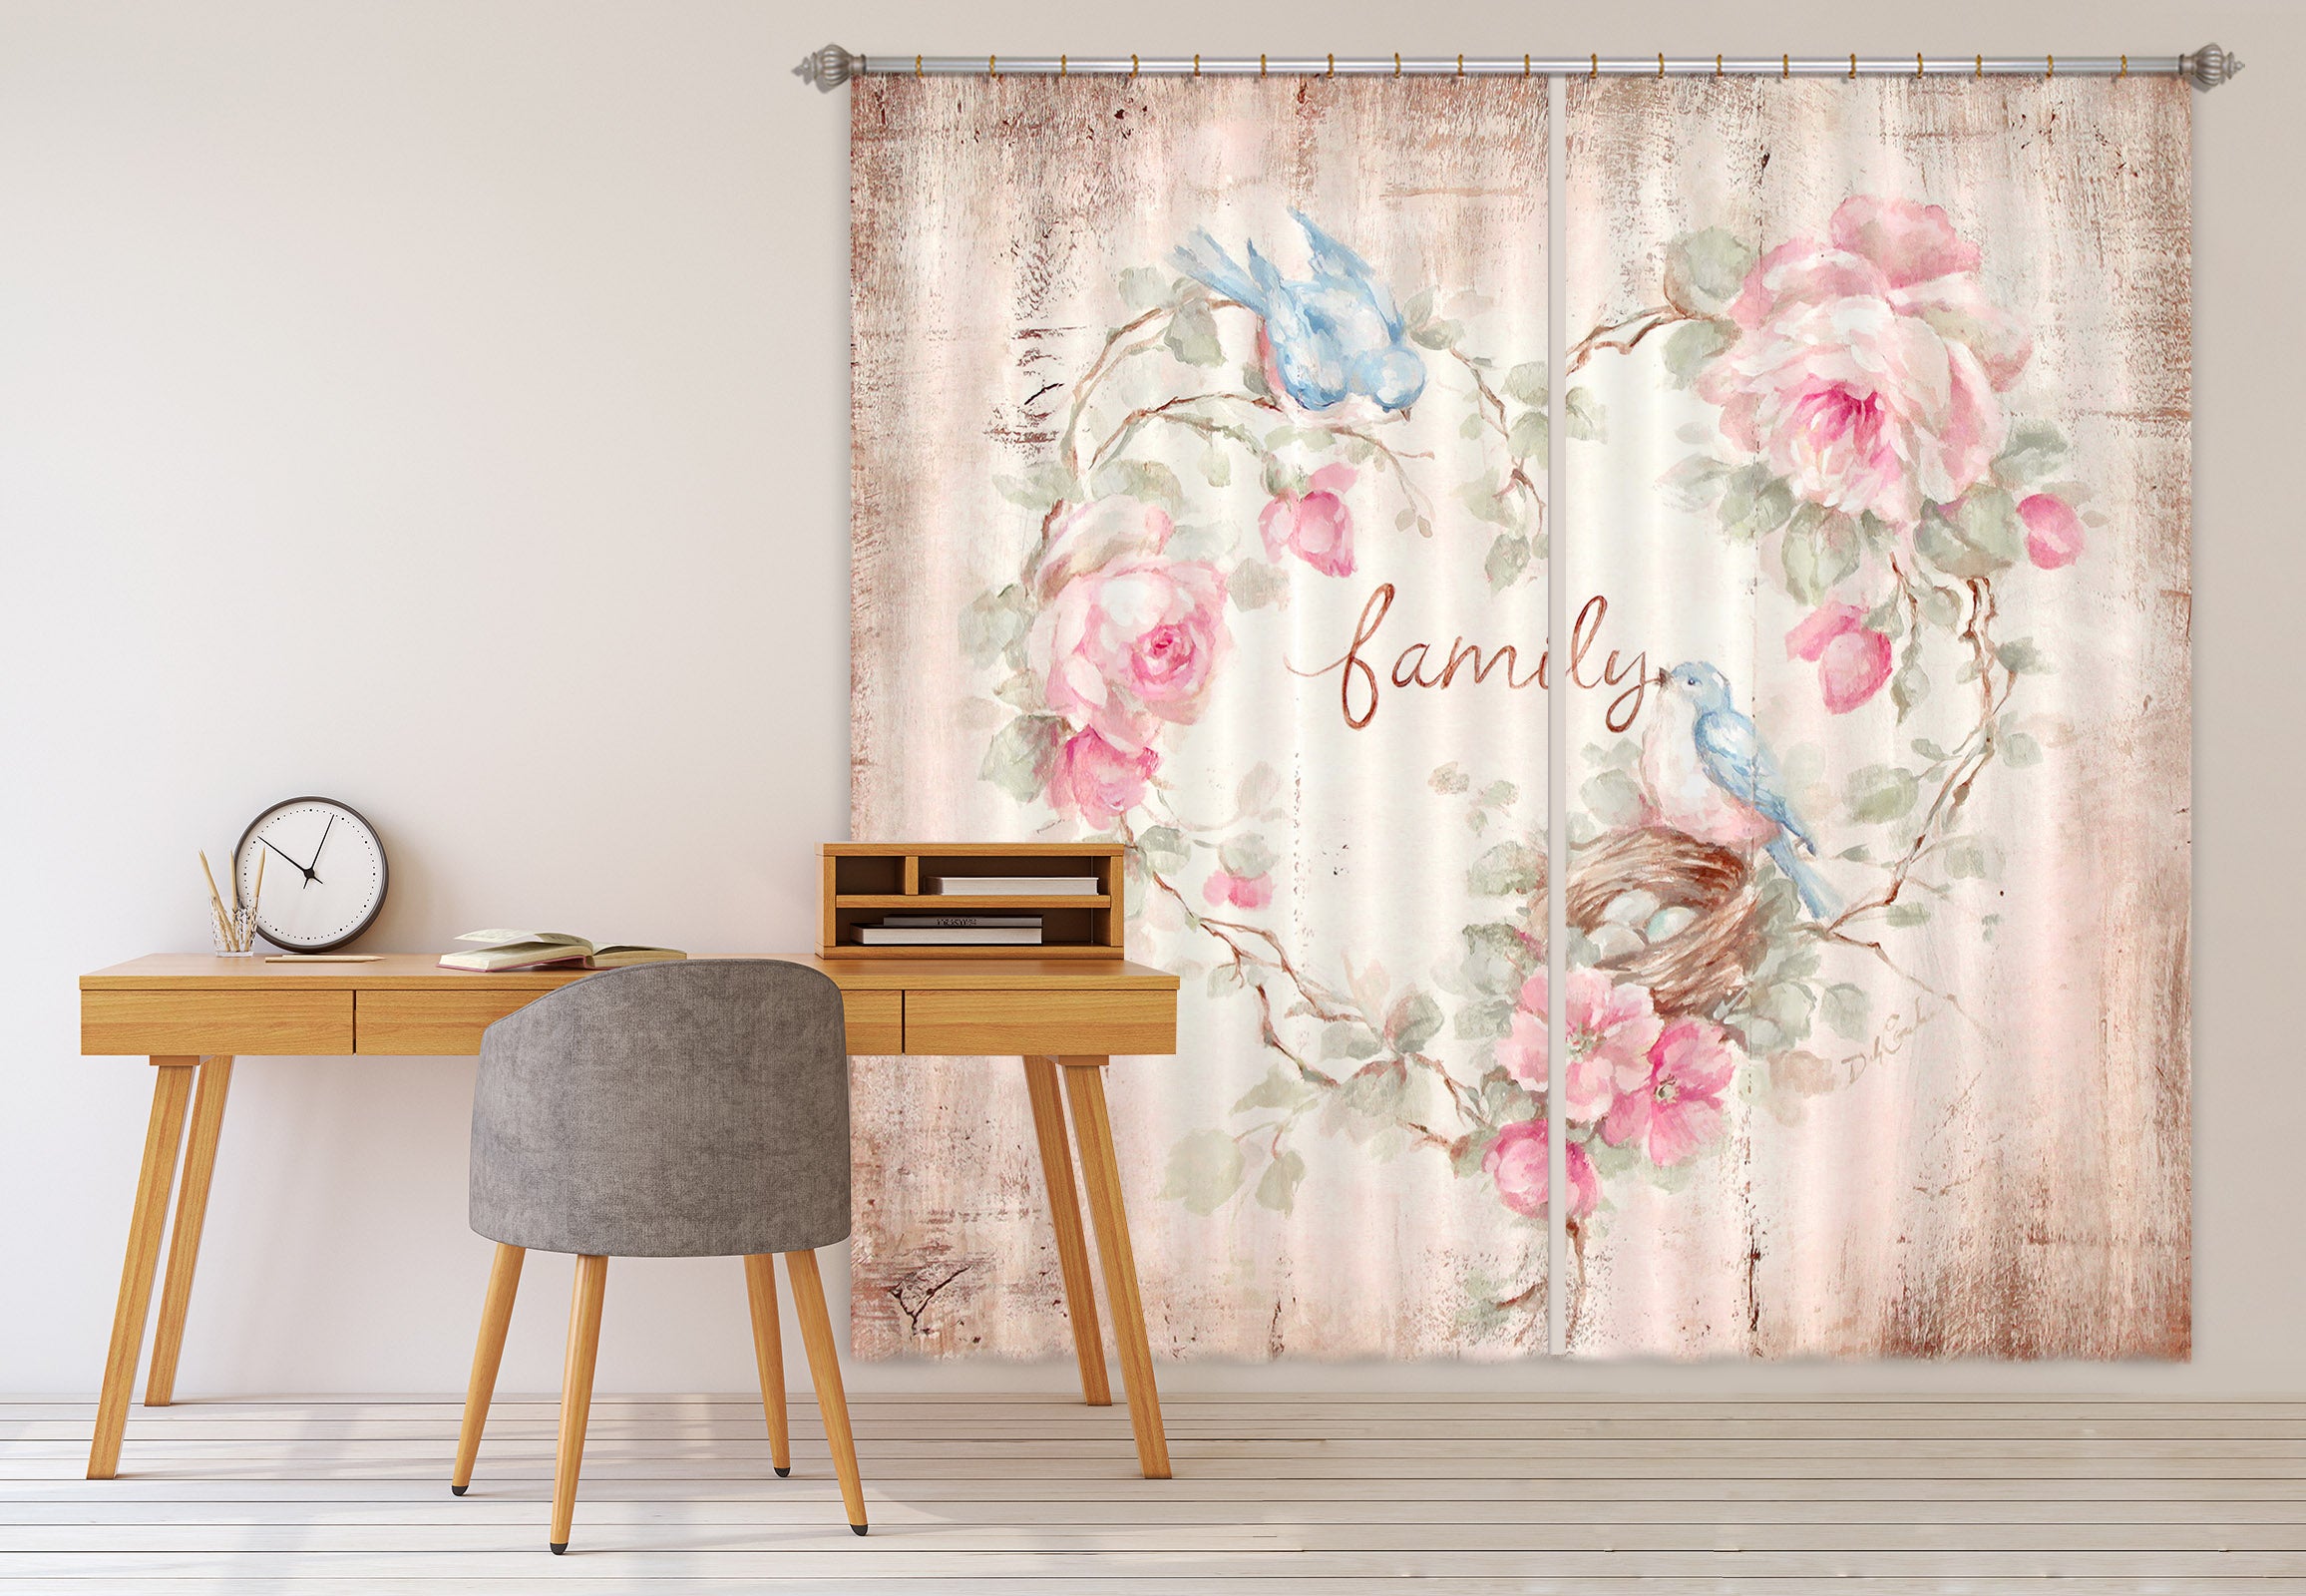 3D Heart Pattern 1005 Debi Coules Curtain Curtains Drapes